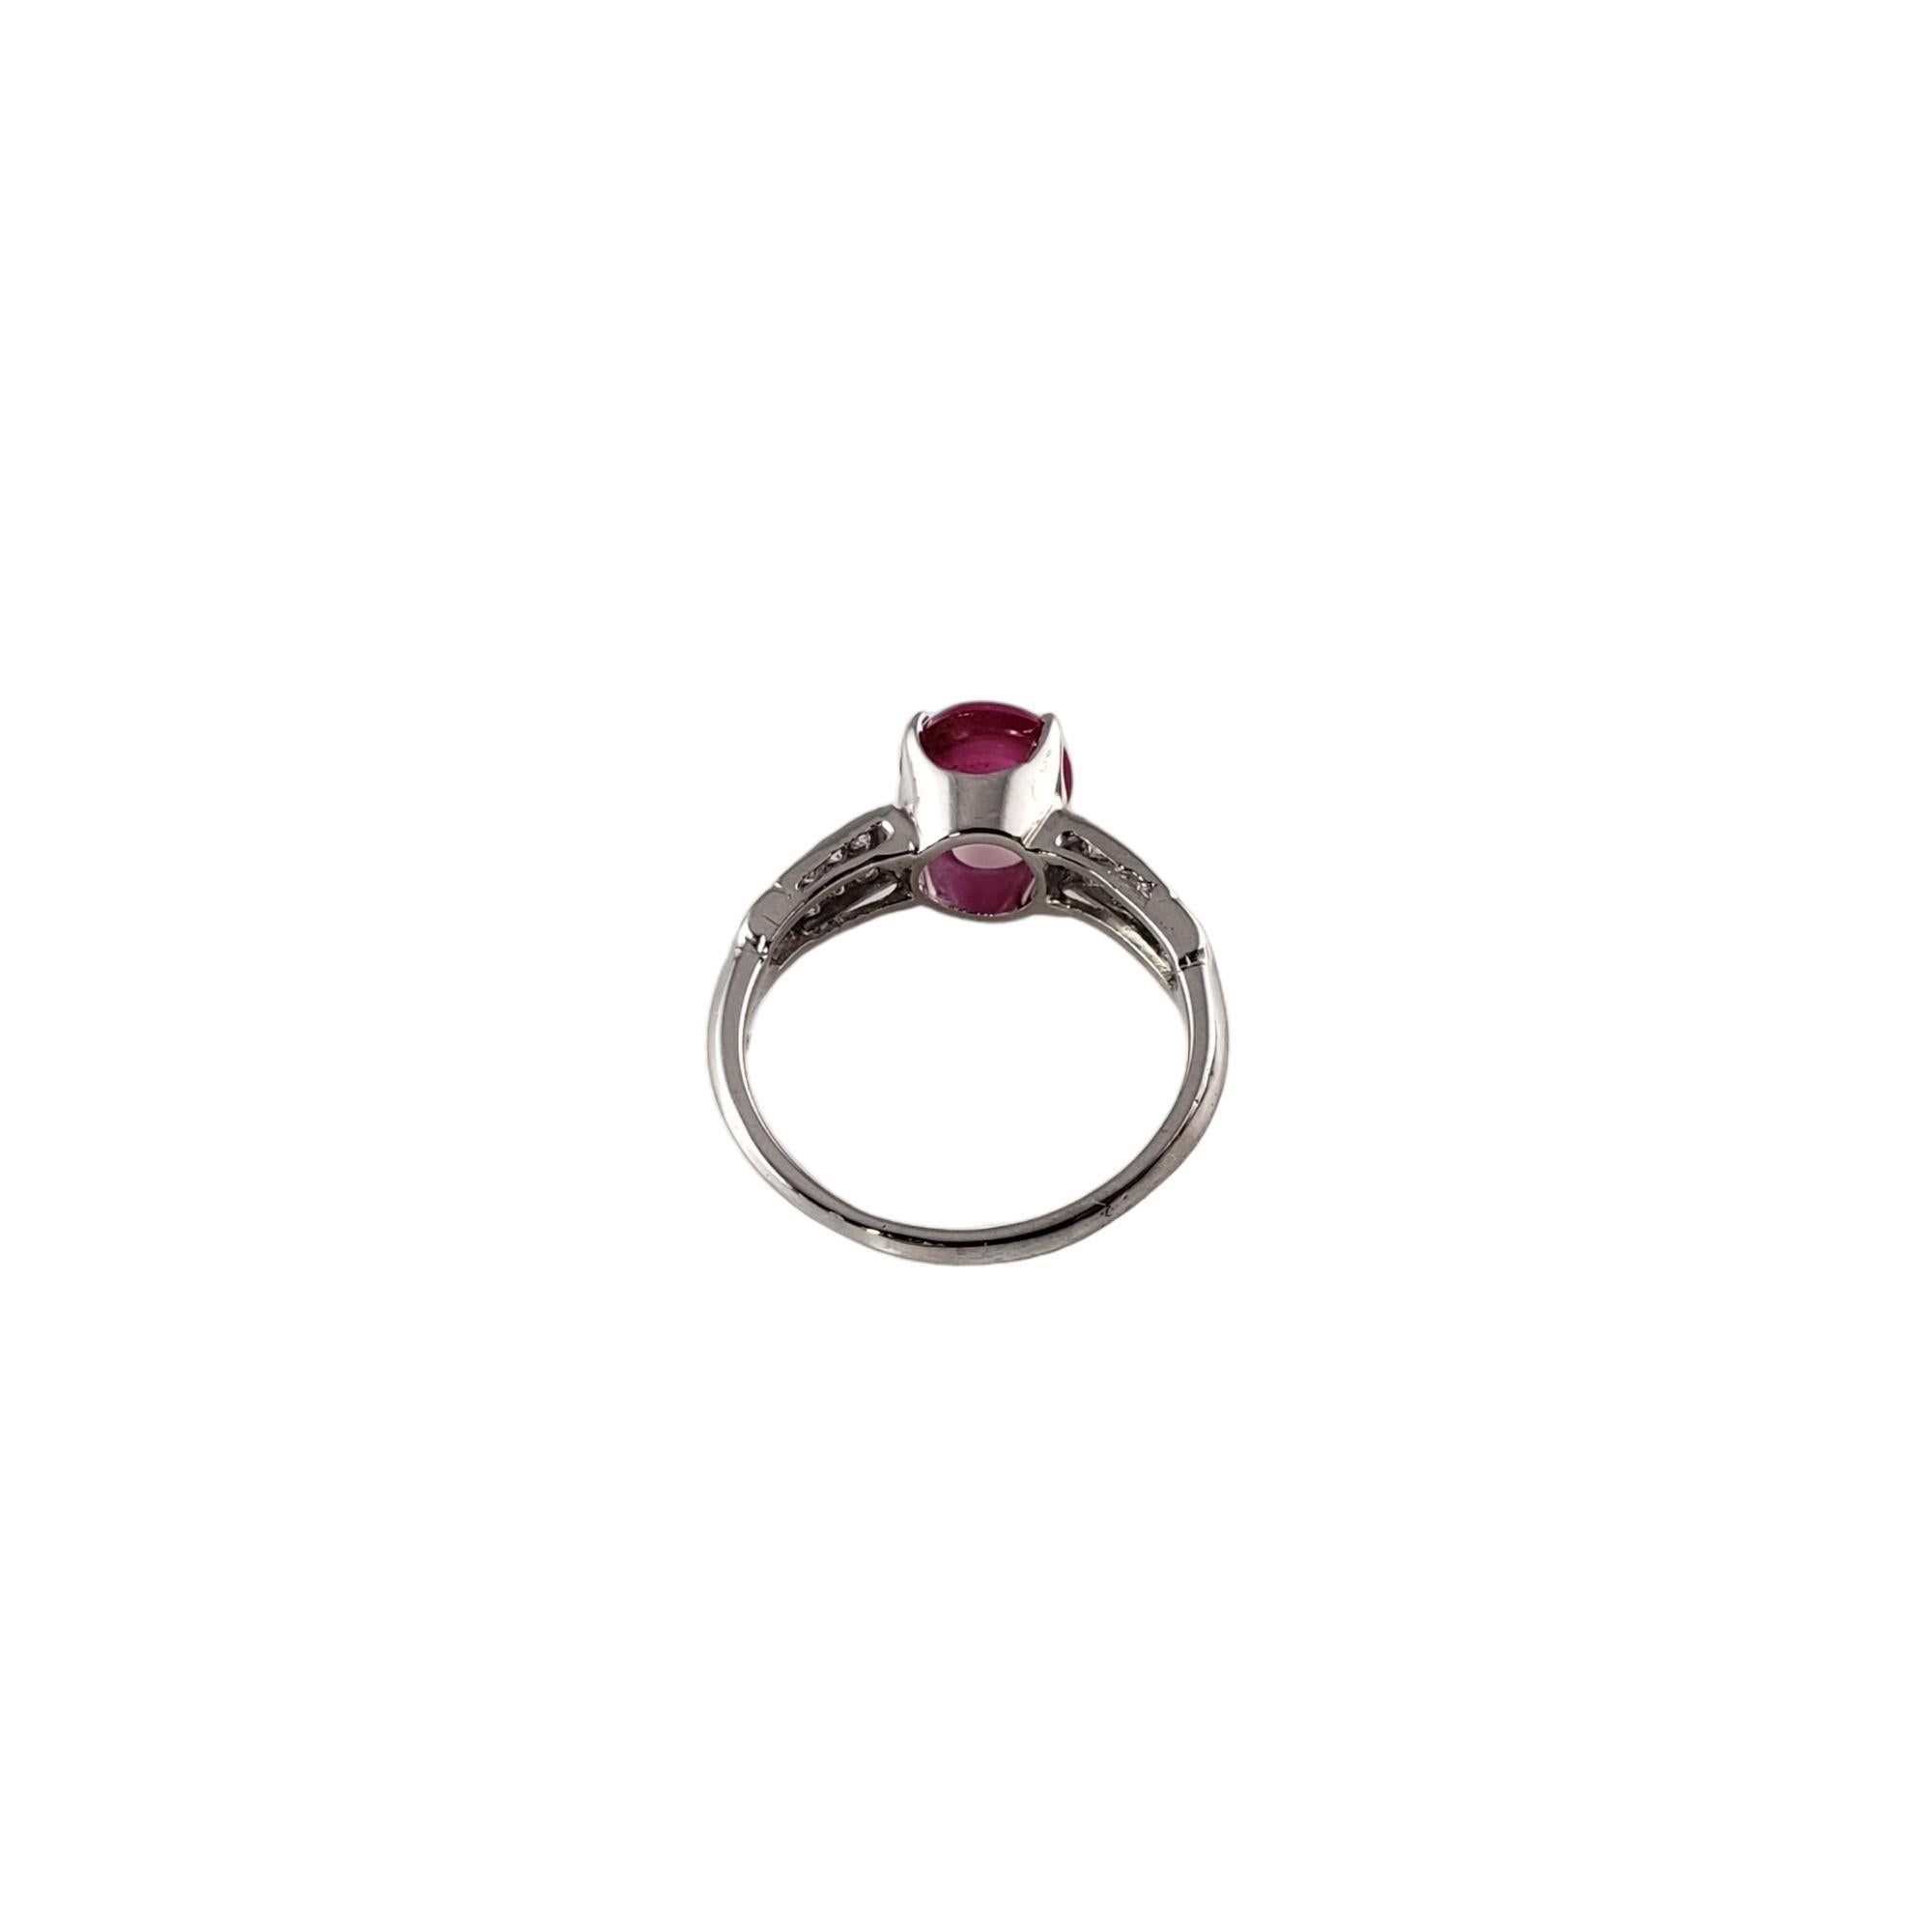 Vintage 14 Karat White Gold Pink Sapphire and Diamond Ring Size 6 JAGi Certified-

This lovely ring features one oval cabochon pink sapphire (7.5 mm x 6.9 mm) and 12 round single cut diamonds set in classic 14K white gold. Shank: 1.5 mm.

Sapphire